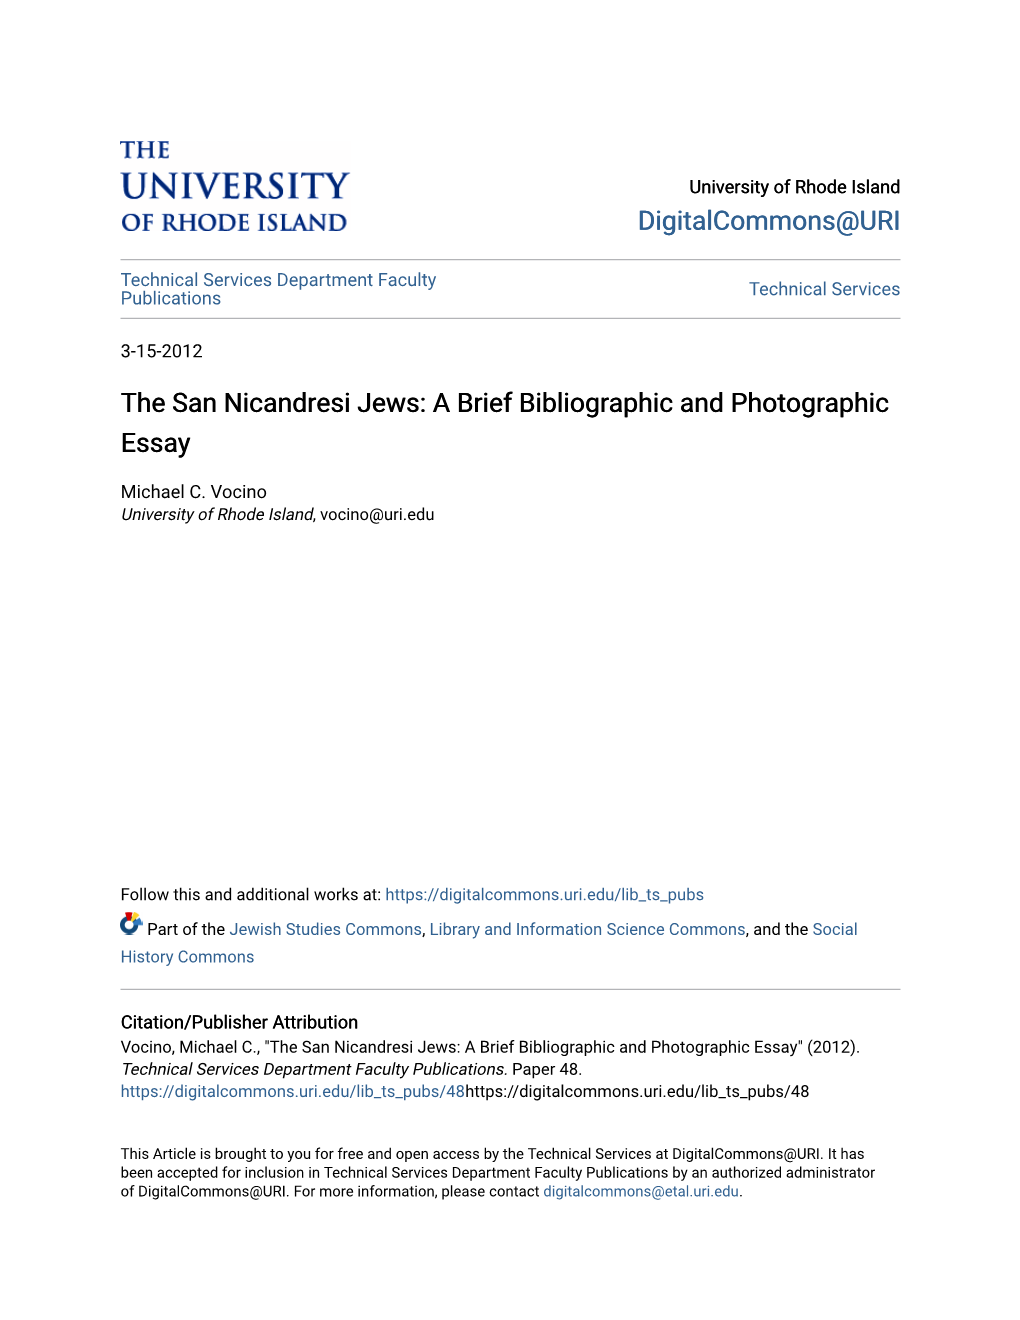 The San Nicandresi Jews: a Brief Bibliographic and Photographic Essay